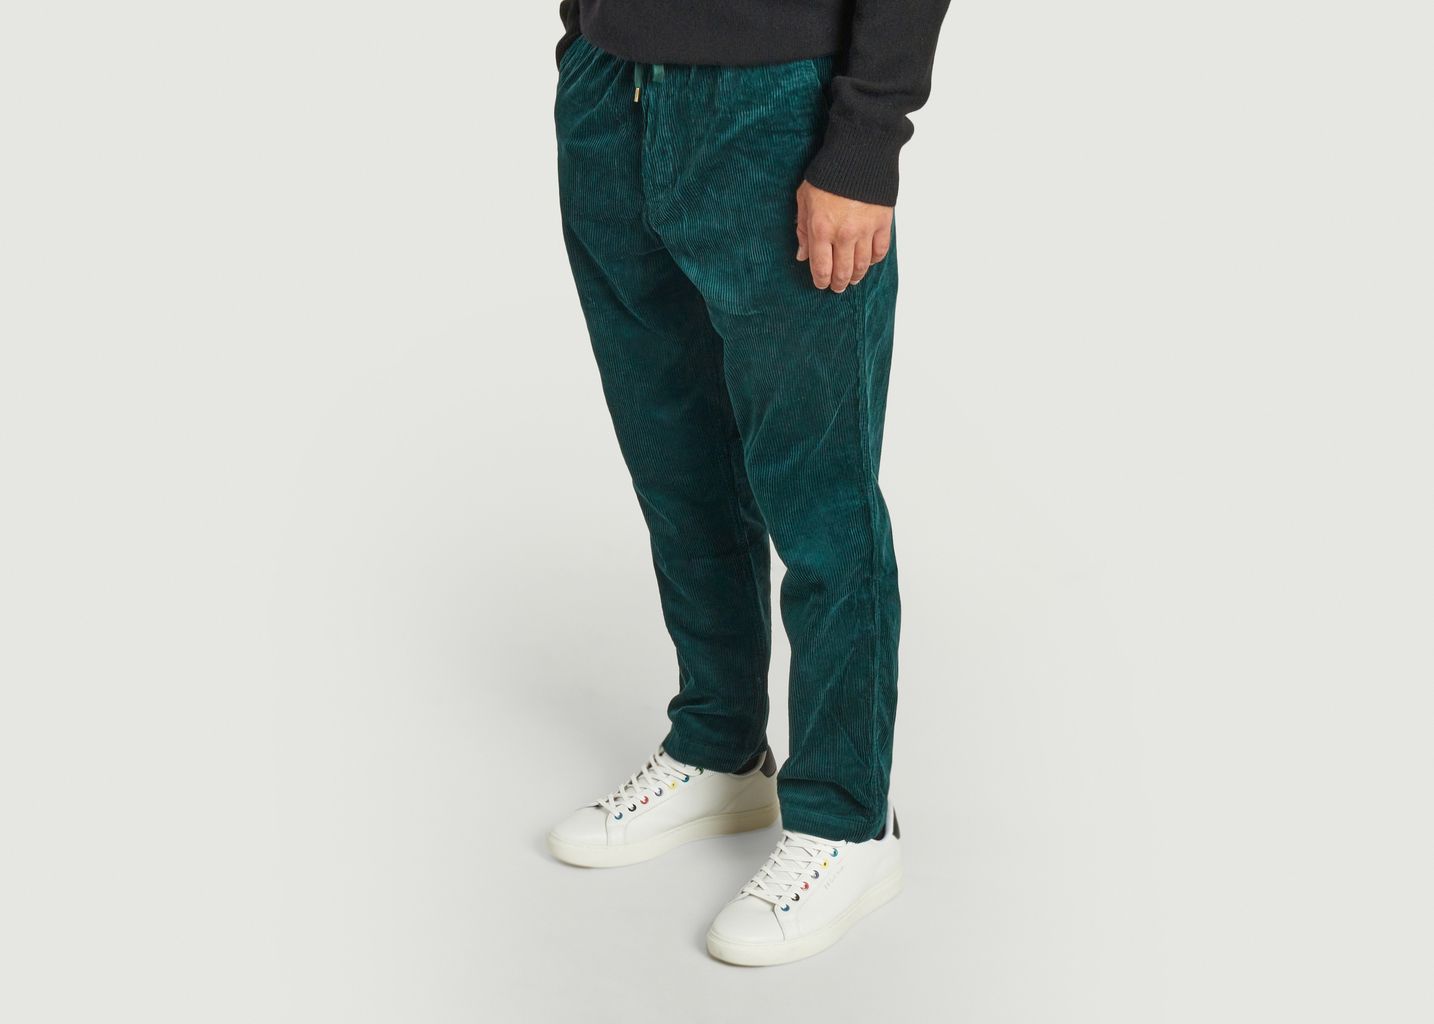 Prepster tapered pants - Polo Ralph Lauren